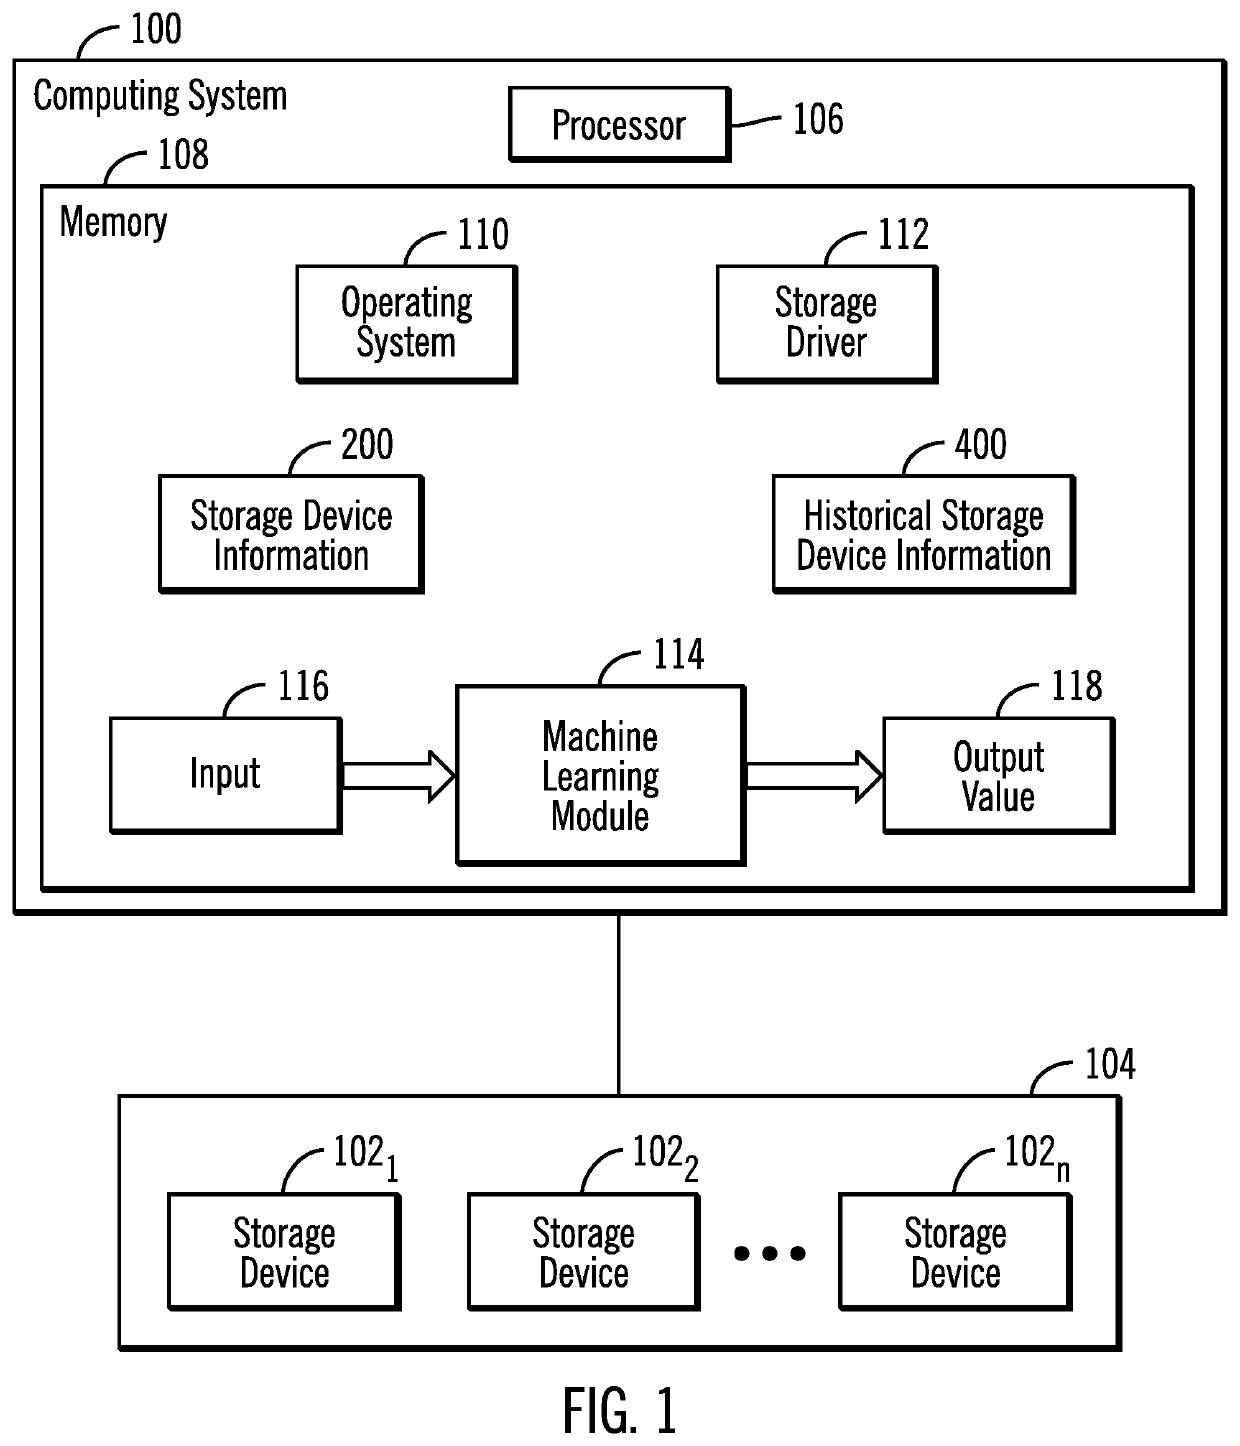 Determining when to replace a storage device using a machine learning module